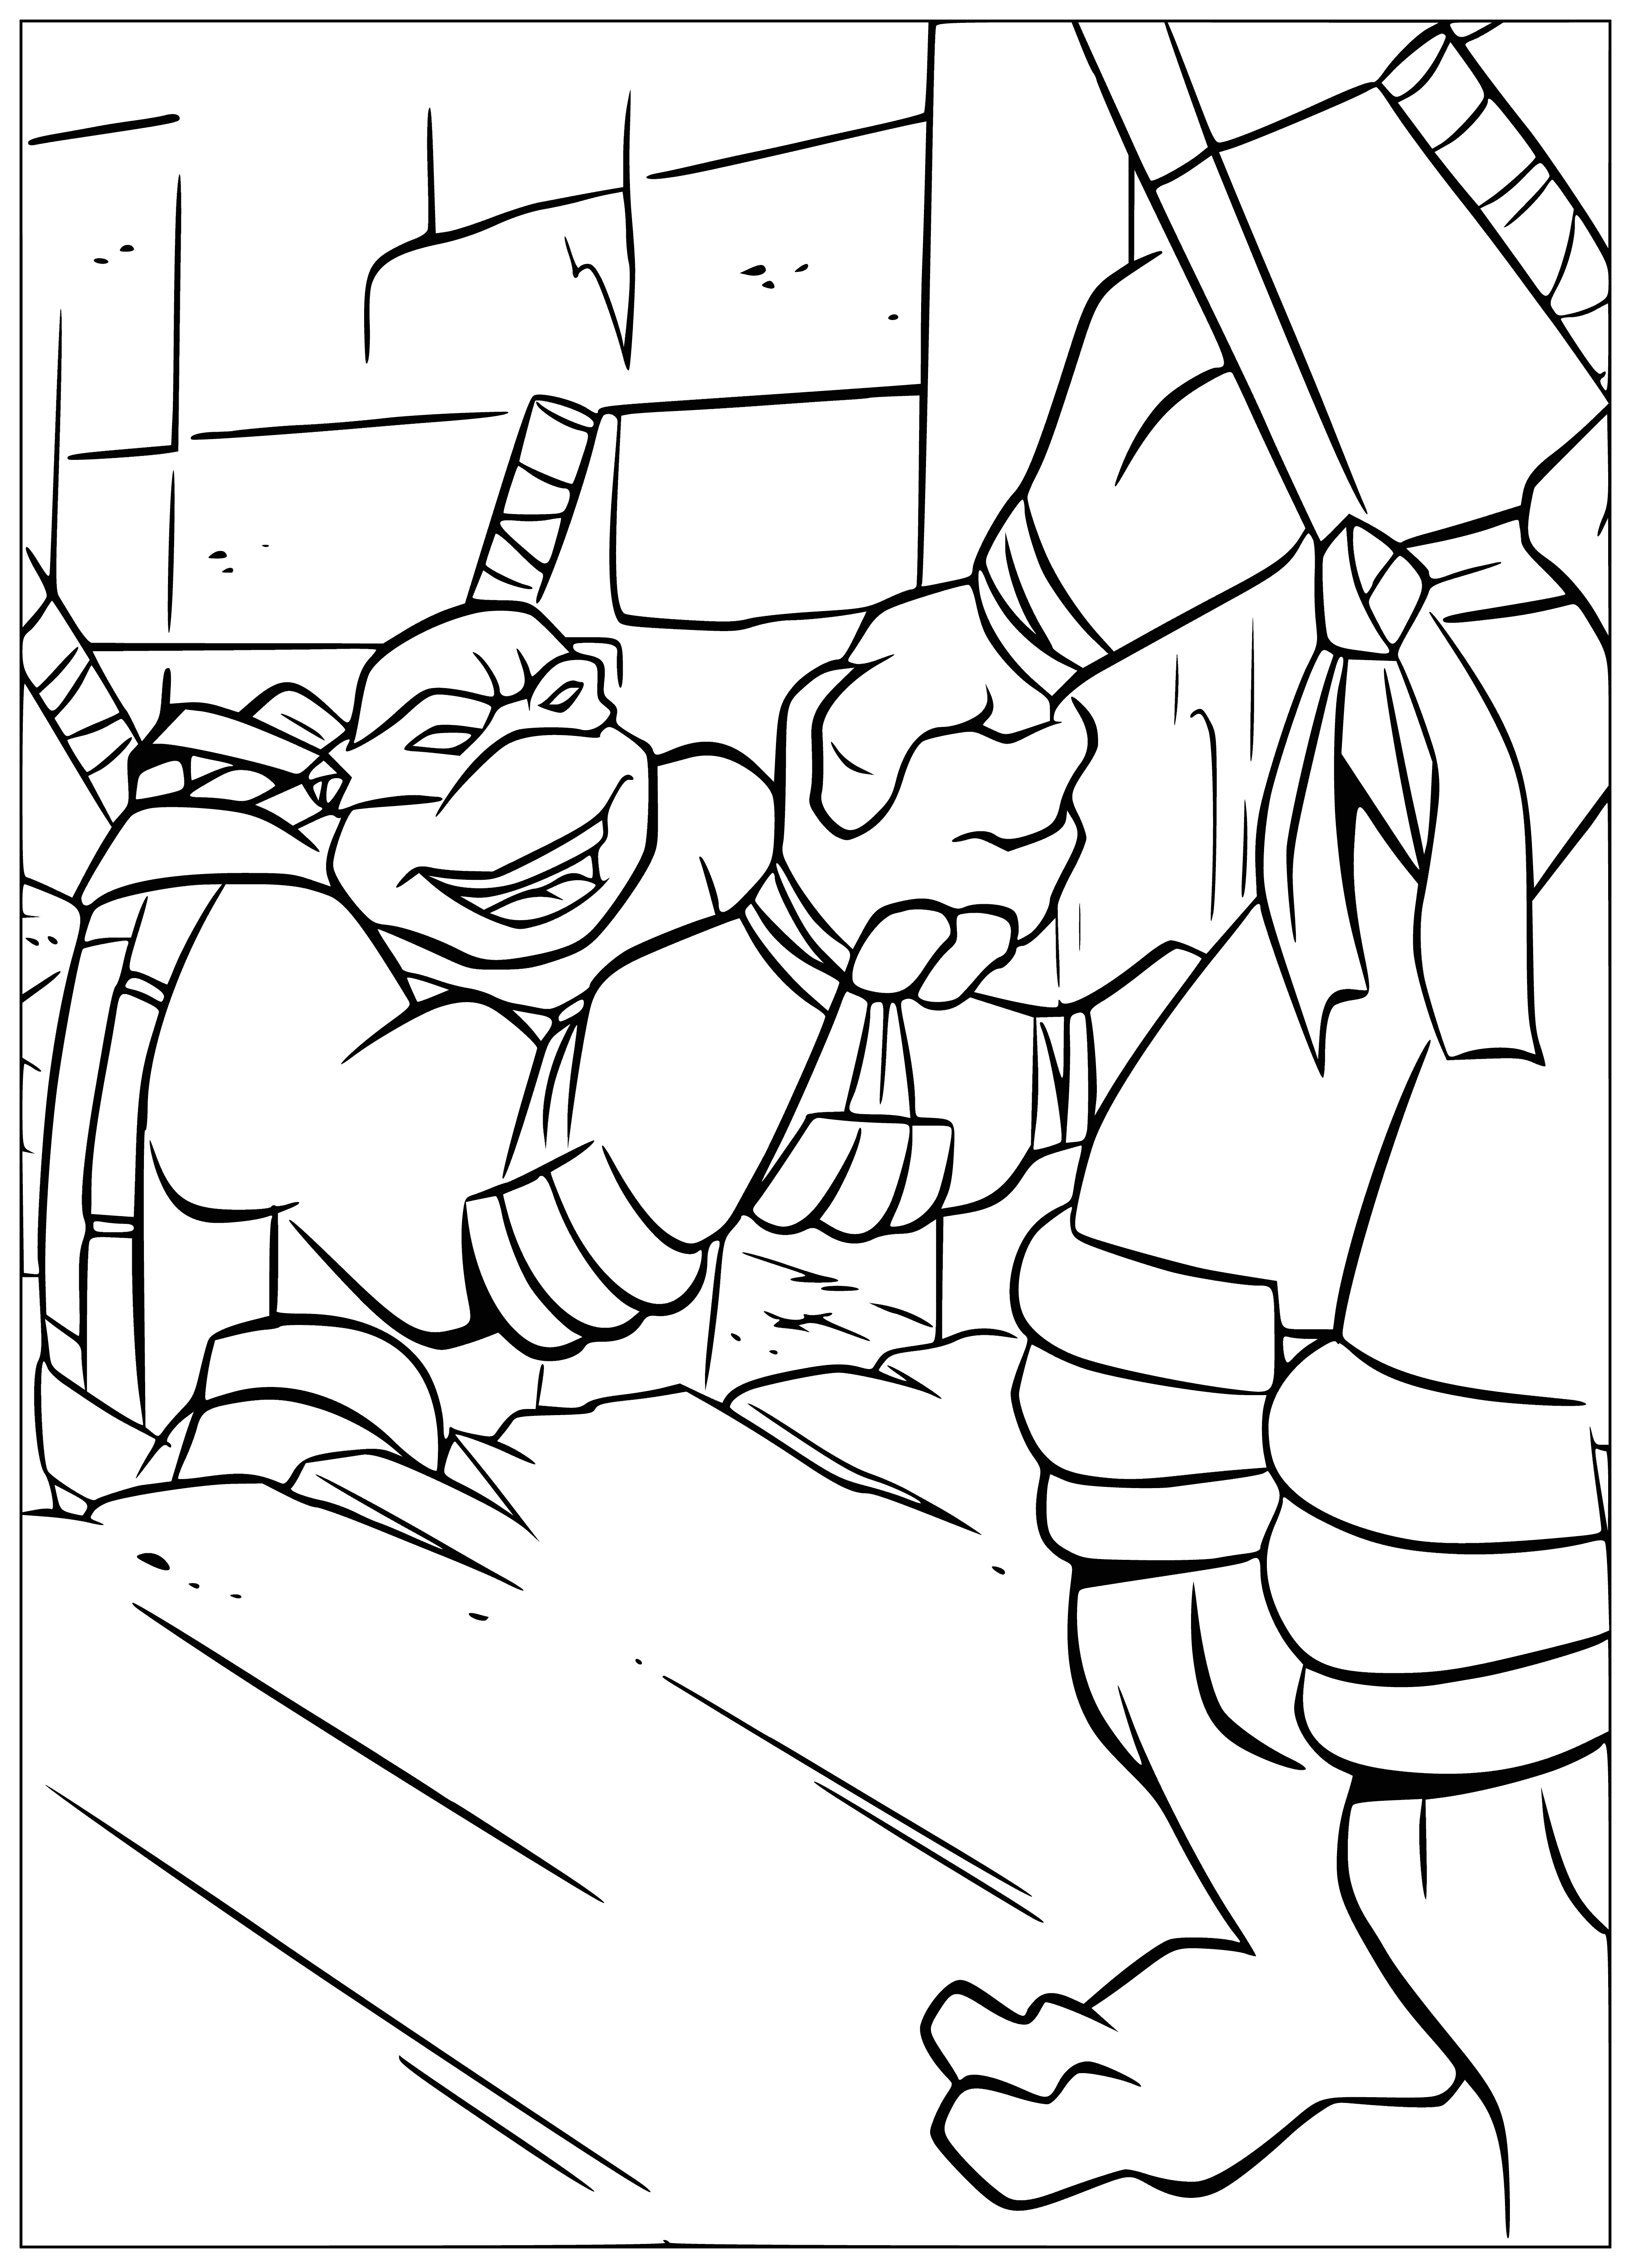 Help a friend coloring page